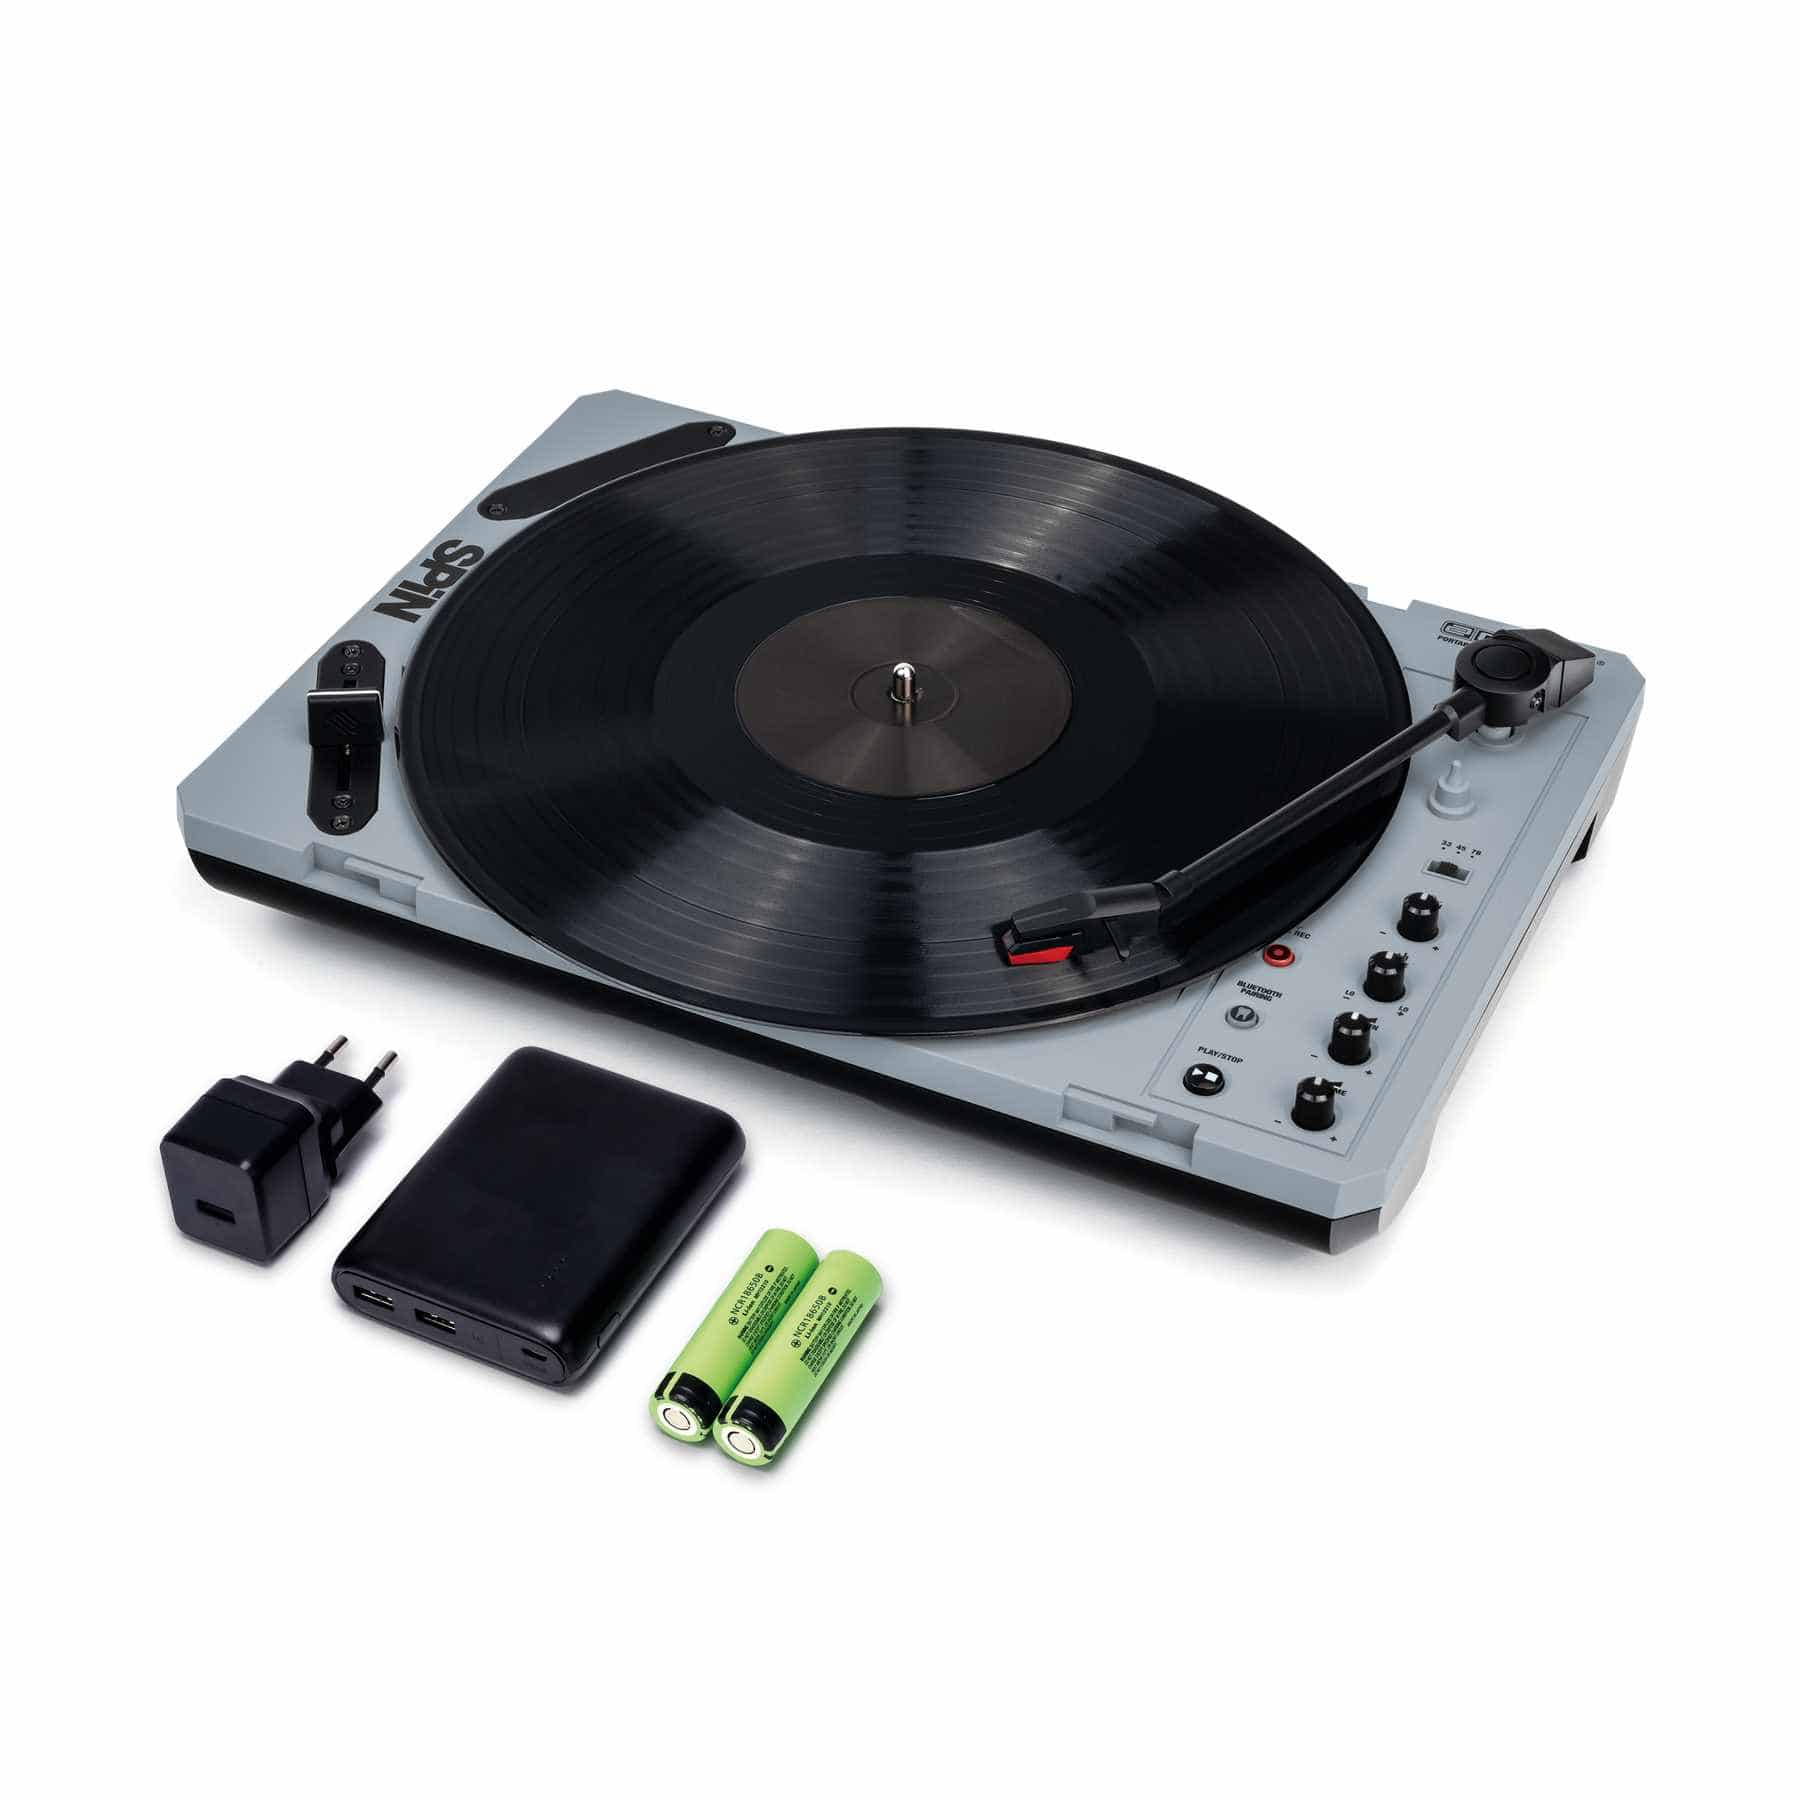 Reloop Spin Portable Turntable System